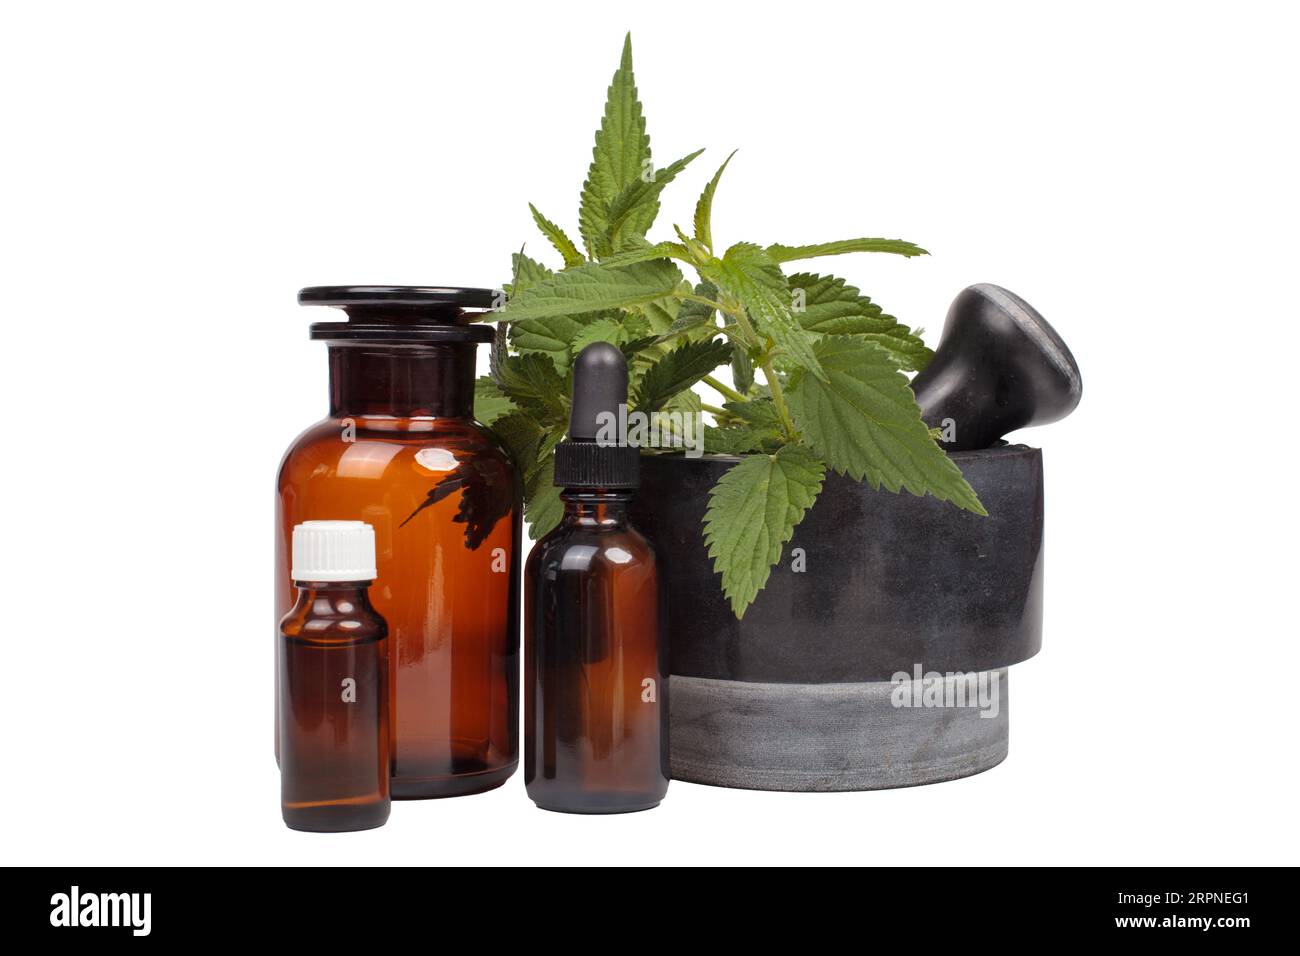 Natural Medicine: Mortar with Nettle and Medical Bottles Stock Photo